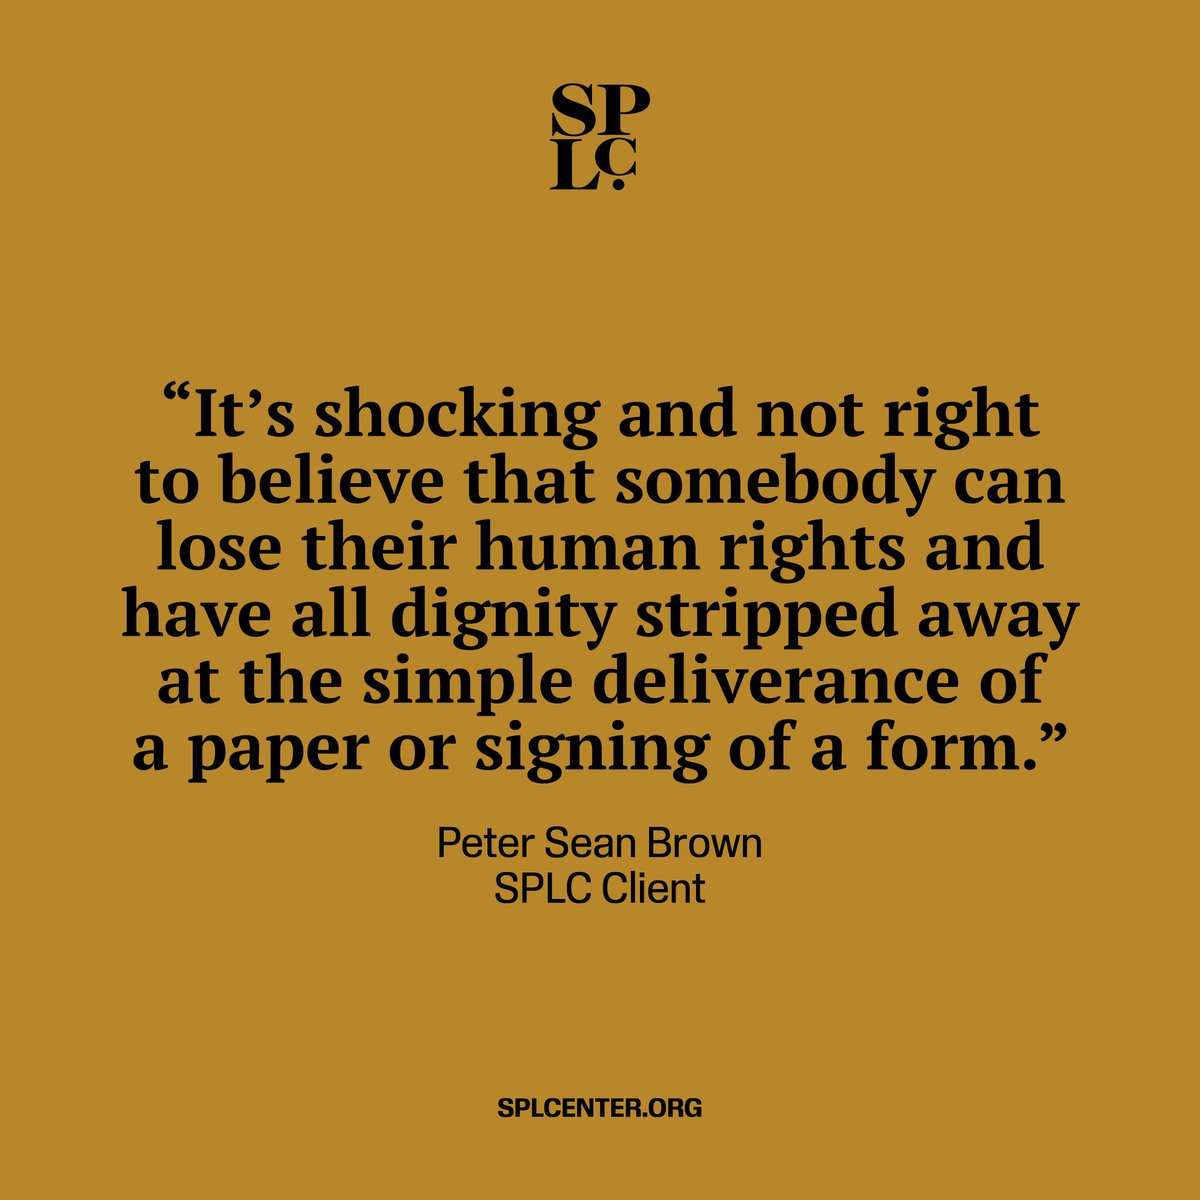 What if you faced deportation despite being born in the U.S.❓Peter Sean Brown experienced this firsthand. Today, the SPLC is in court seeking justice – local police have no place enforcing immigration laws. Read Brown's case docket 📲: bit.ly/3bL8Yex #ImmigrantJustice